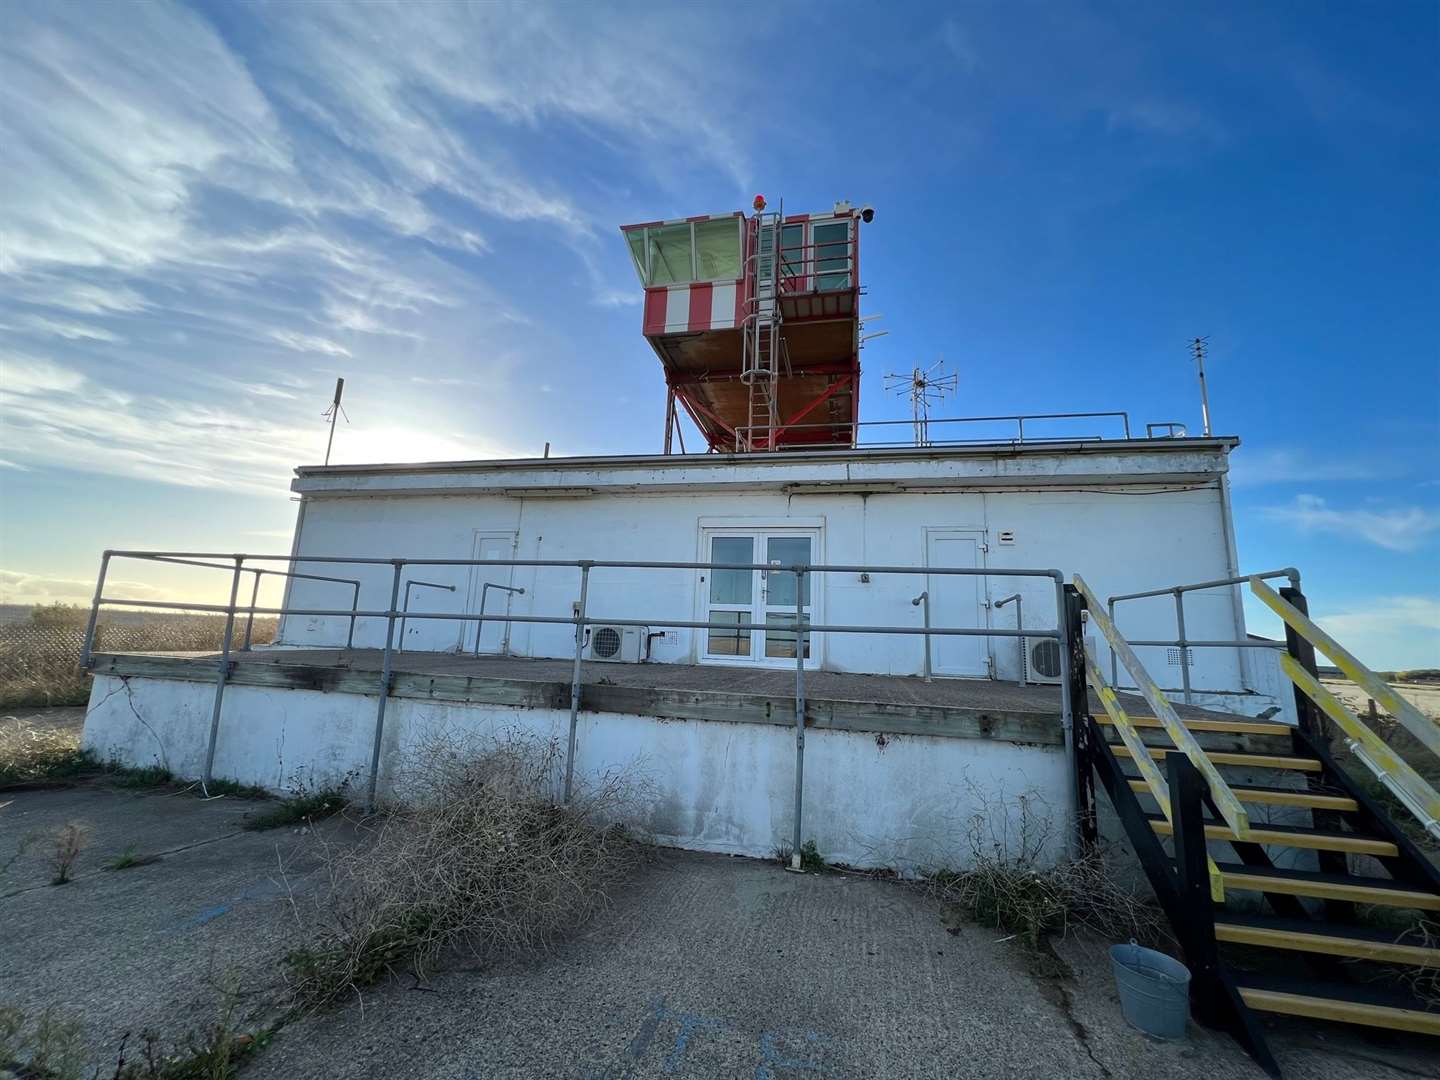 The control tower today stands empty overlooking the runway and along the east coast